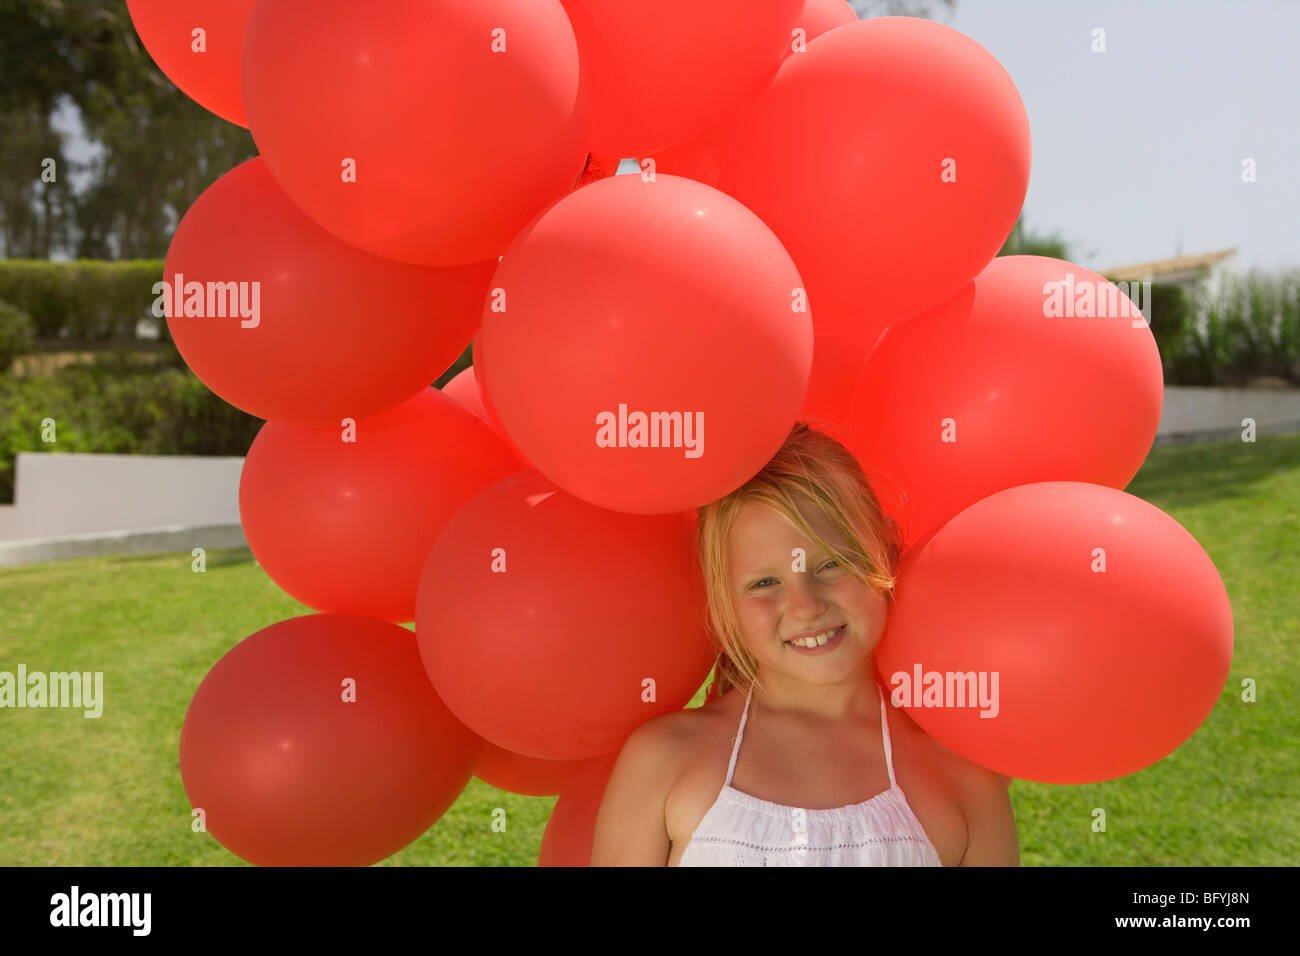 Young Girl holding bunch of red balloons Banque D'Images